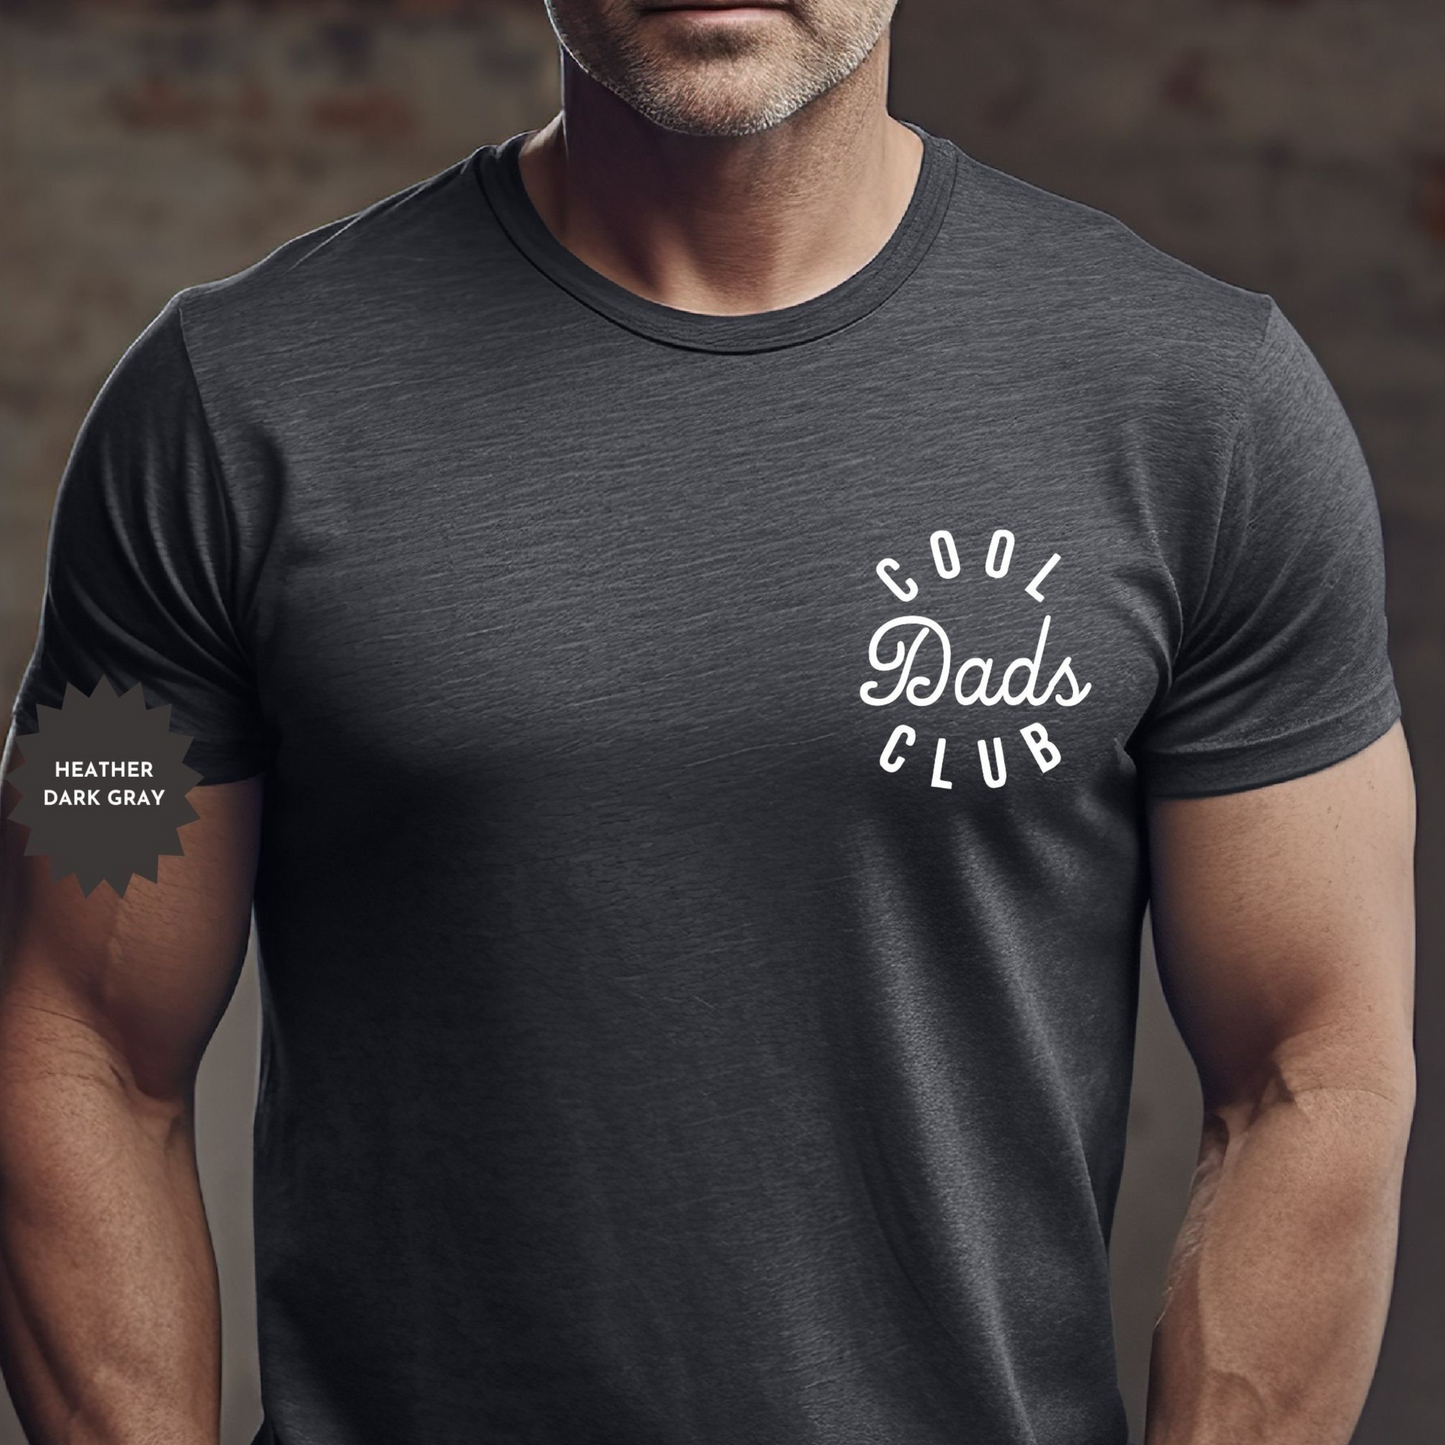 Cool Dads Club Shirt – Funny and Stylish Gift for Dads